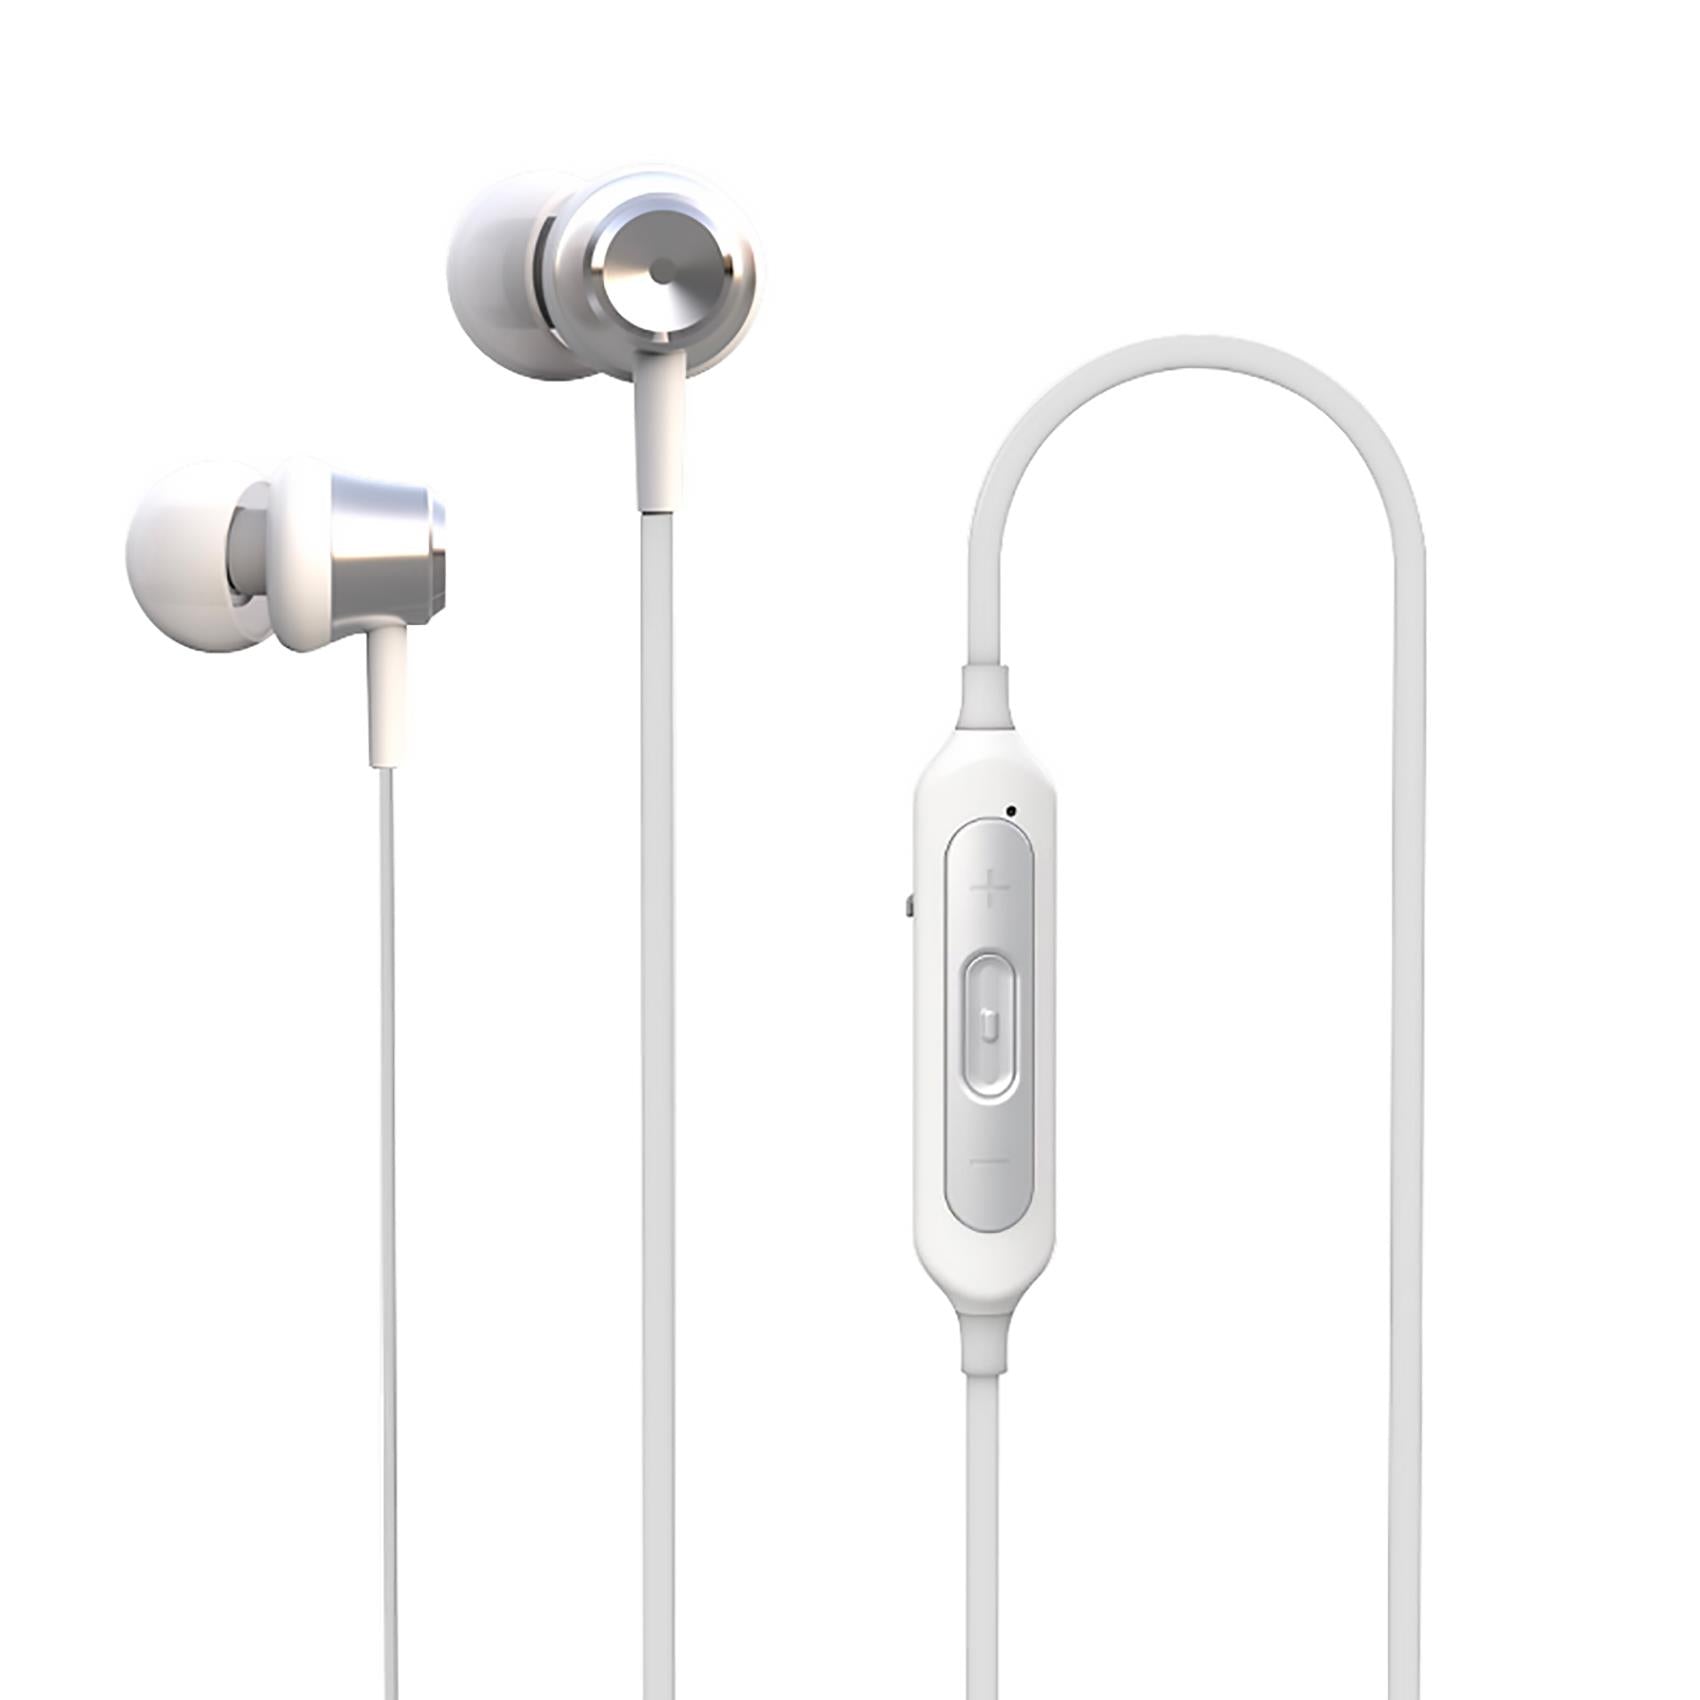 Celly BHSTEREO2 Stereo Bluetooth Earphones White